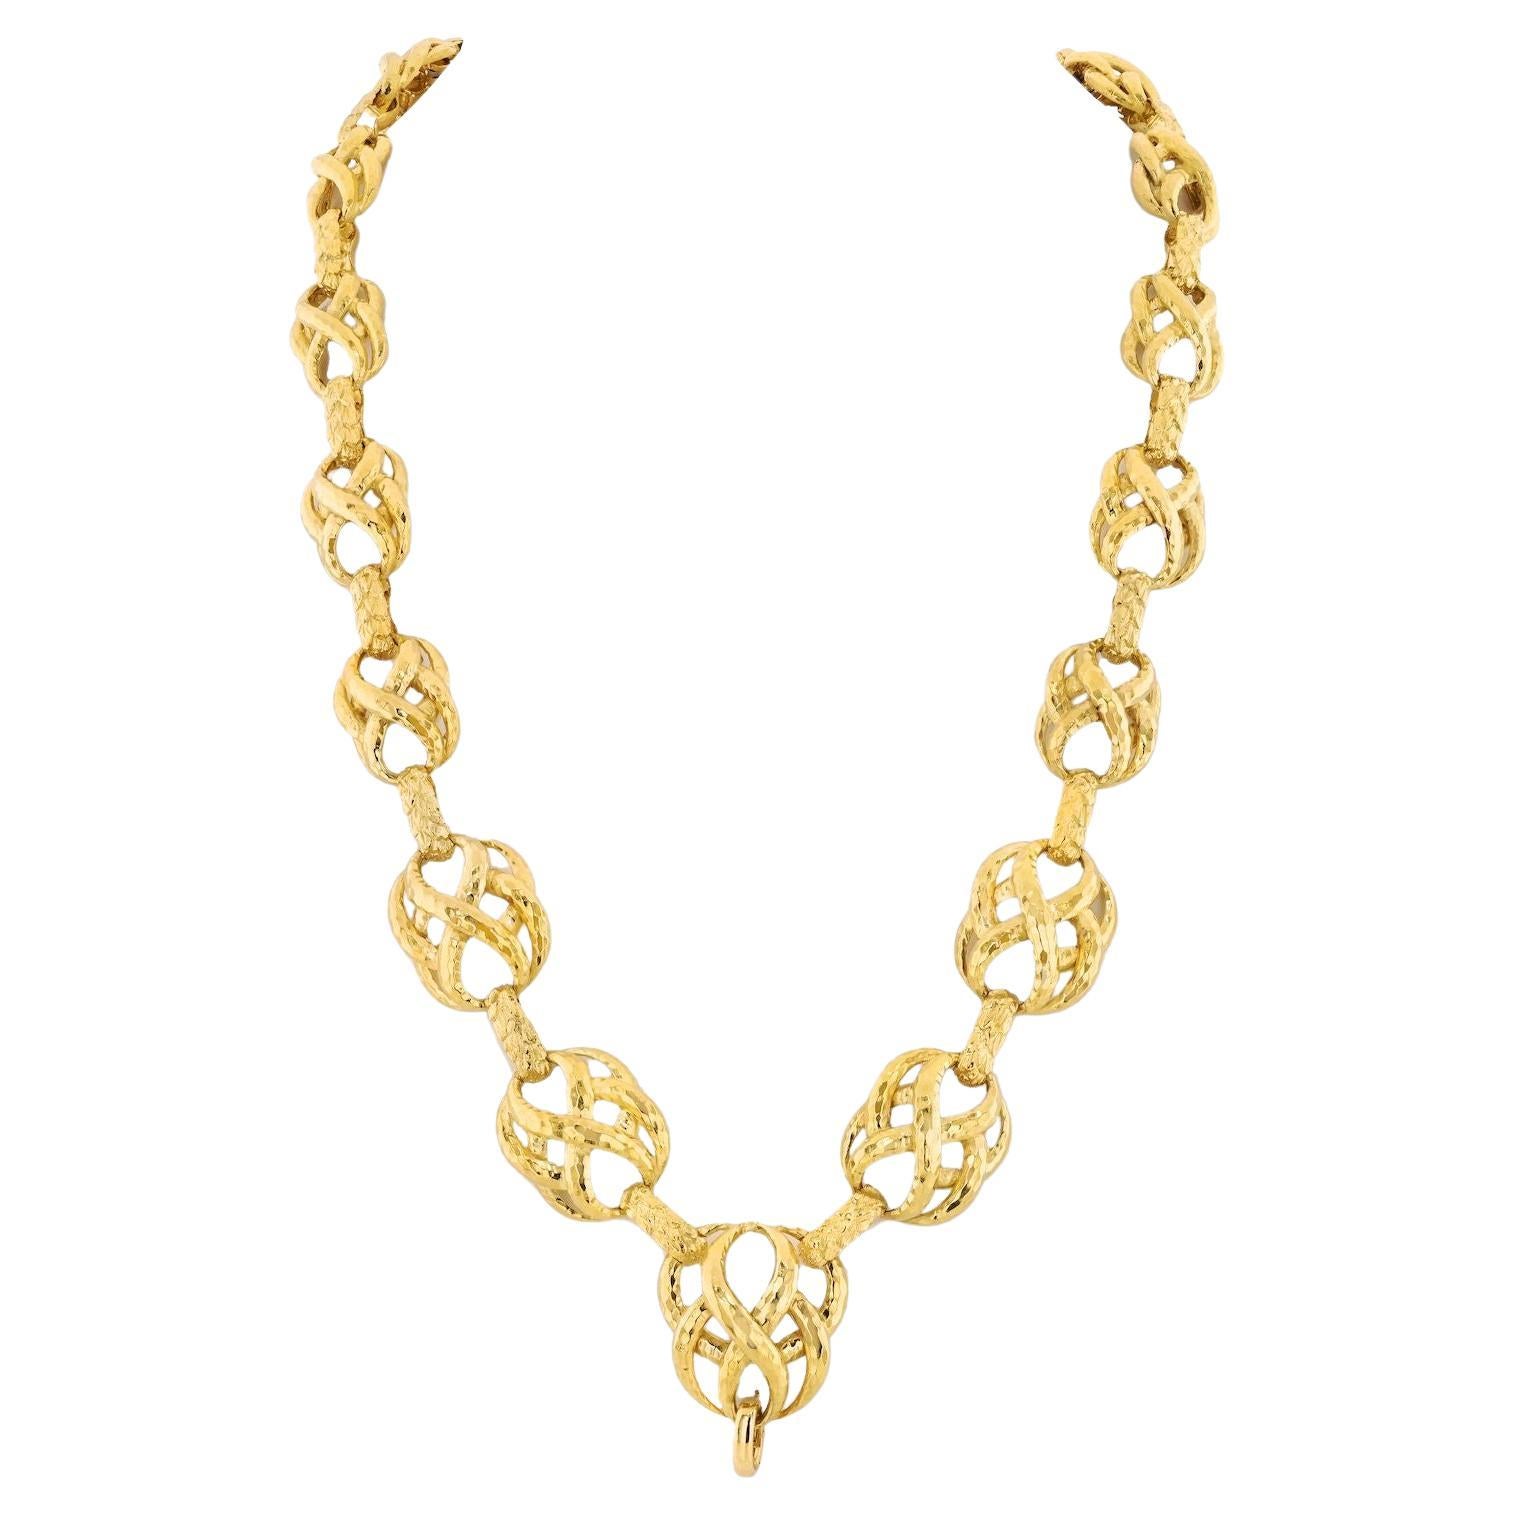 David Webb 18K Yellow Gold Textured Twisted Link Necklace